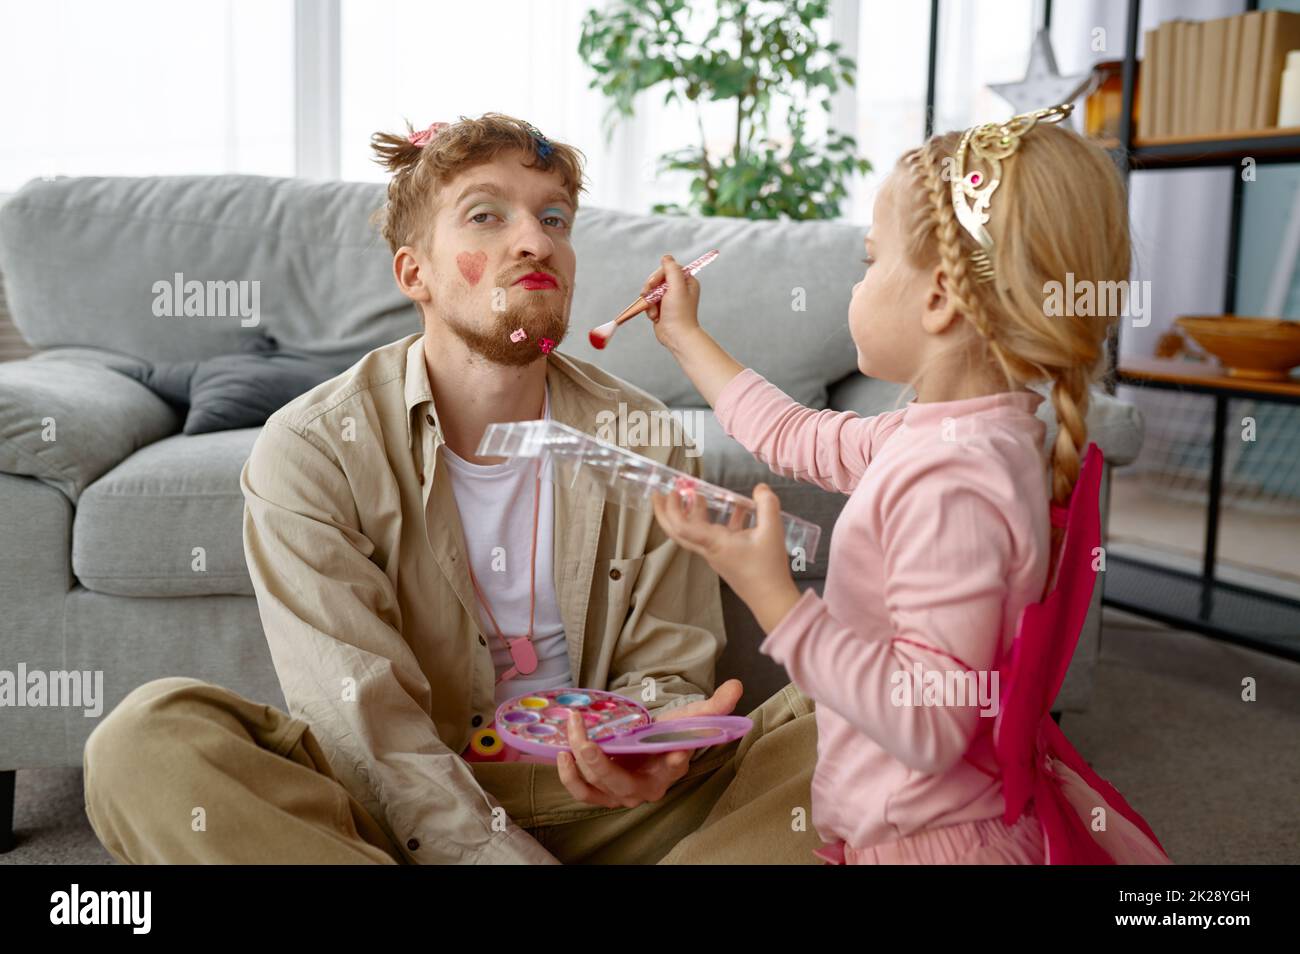 Father spends time with daughter, focus on smiling daughter Stock Photo